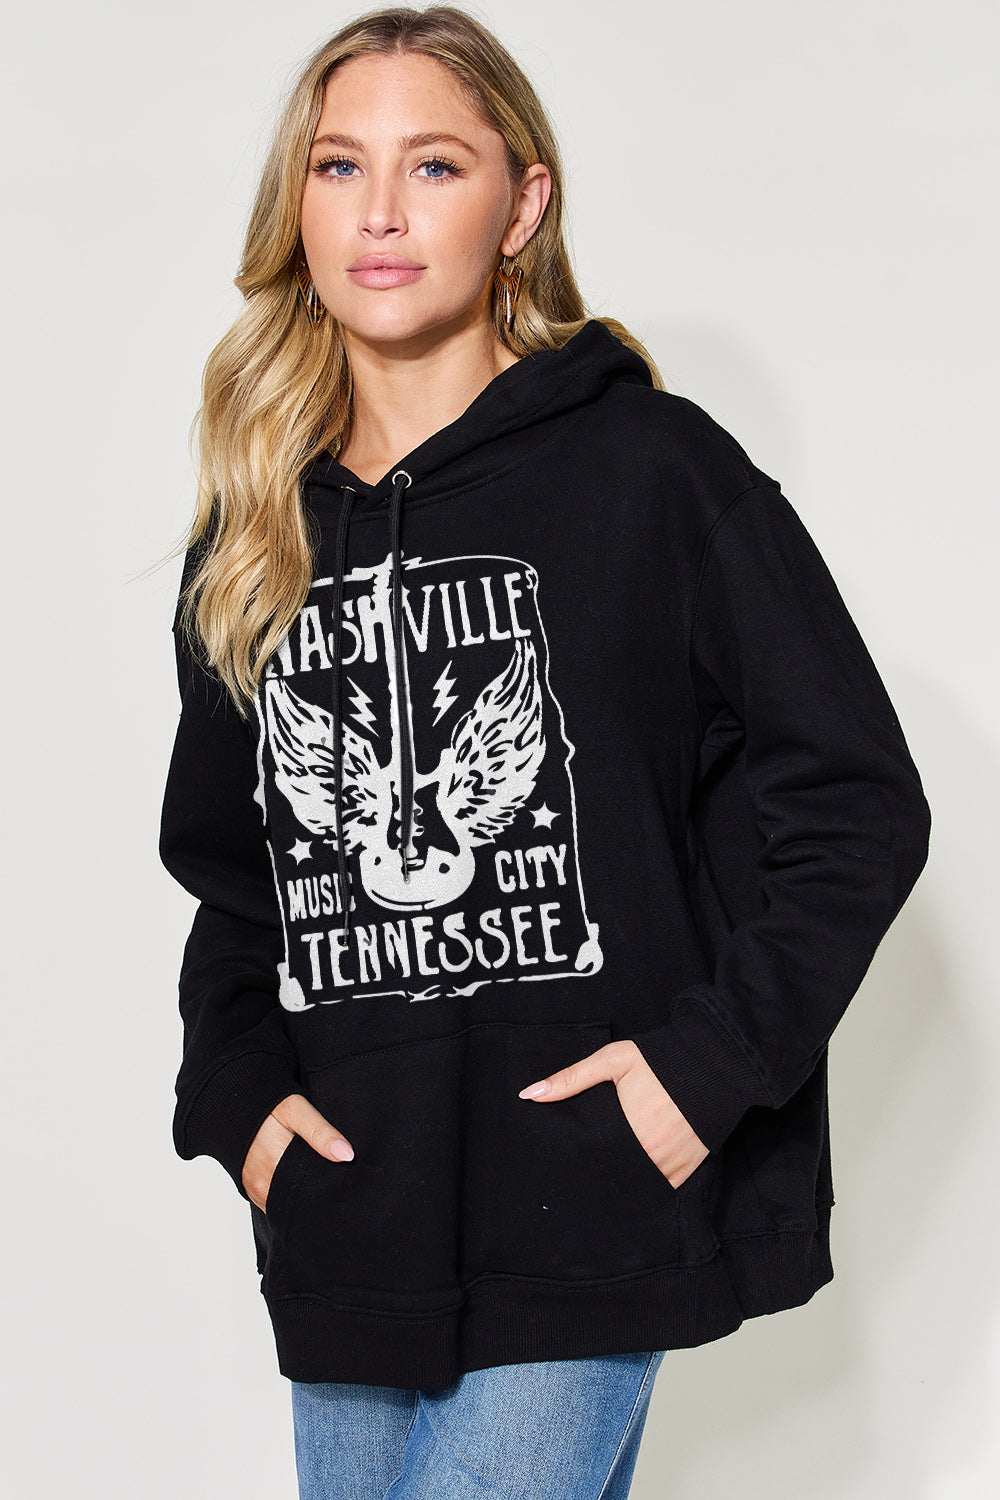 Simply Love Full Size Nashville Graphic Long Sleeve Hoodie